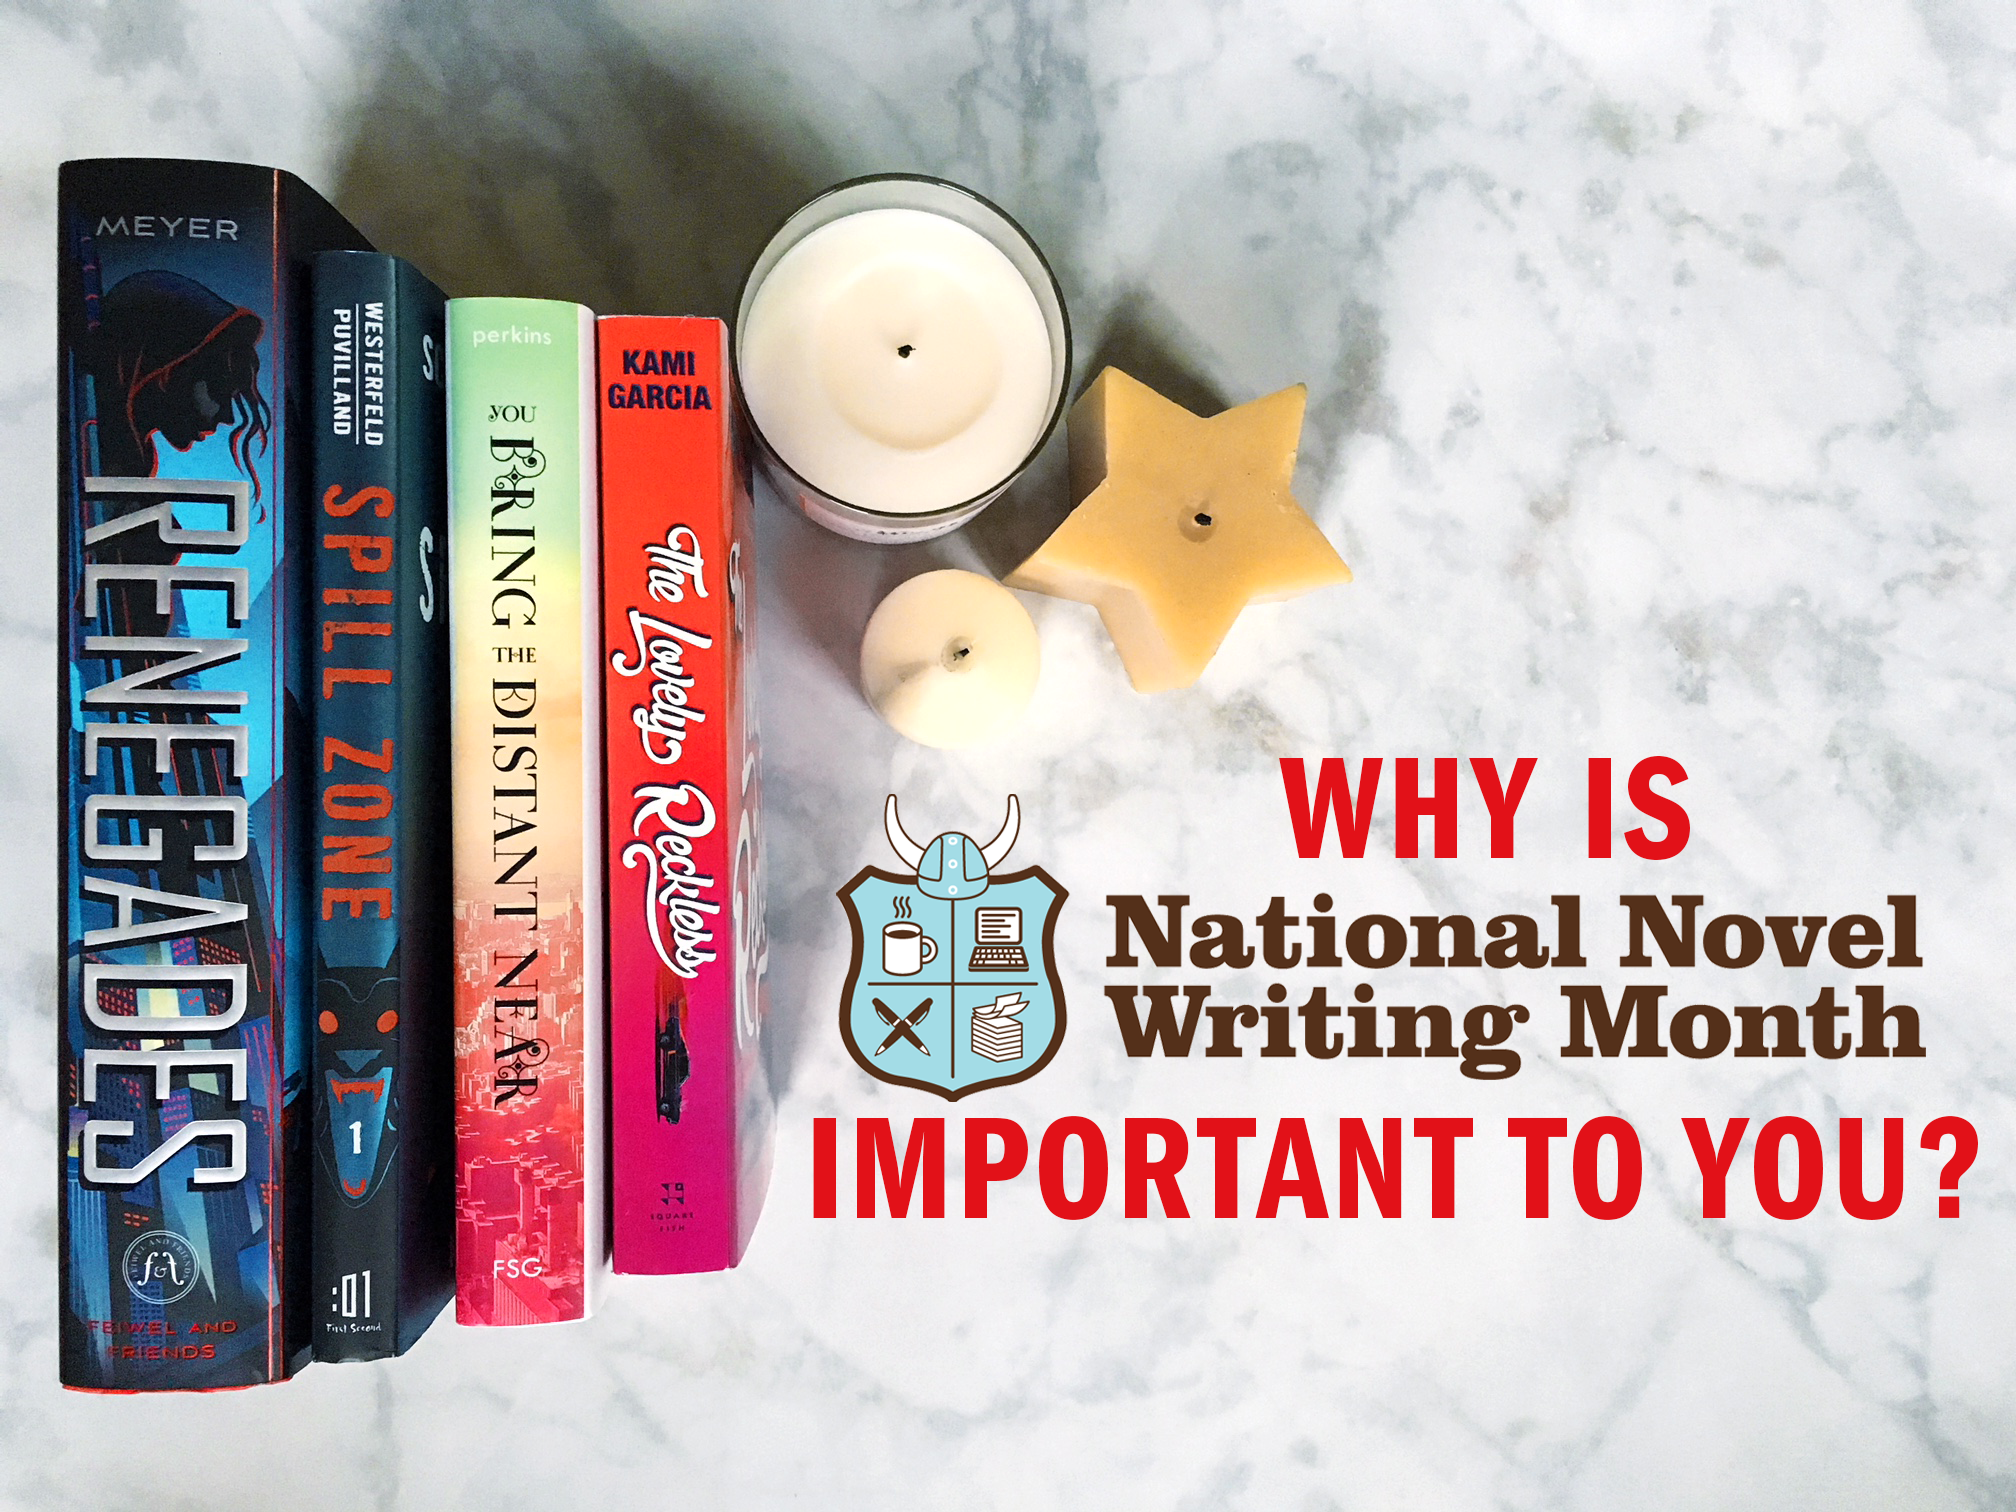 Mitali Perkins Answers: Why is NaNoWriMo Important to You?